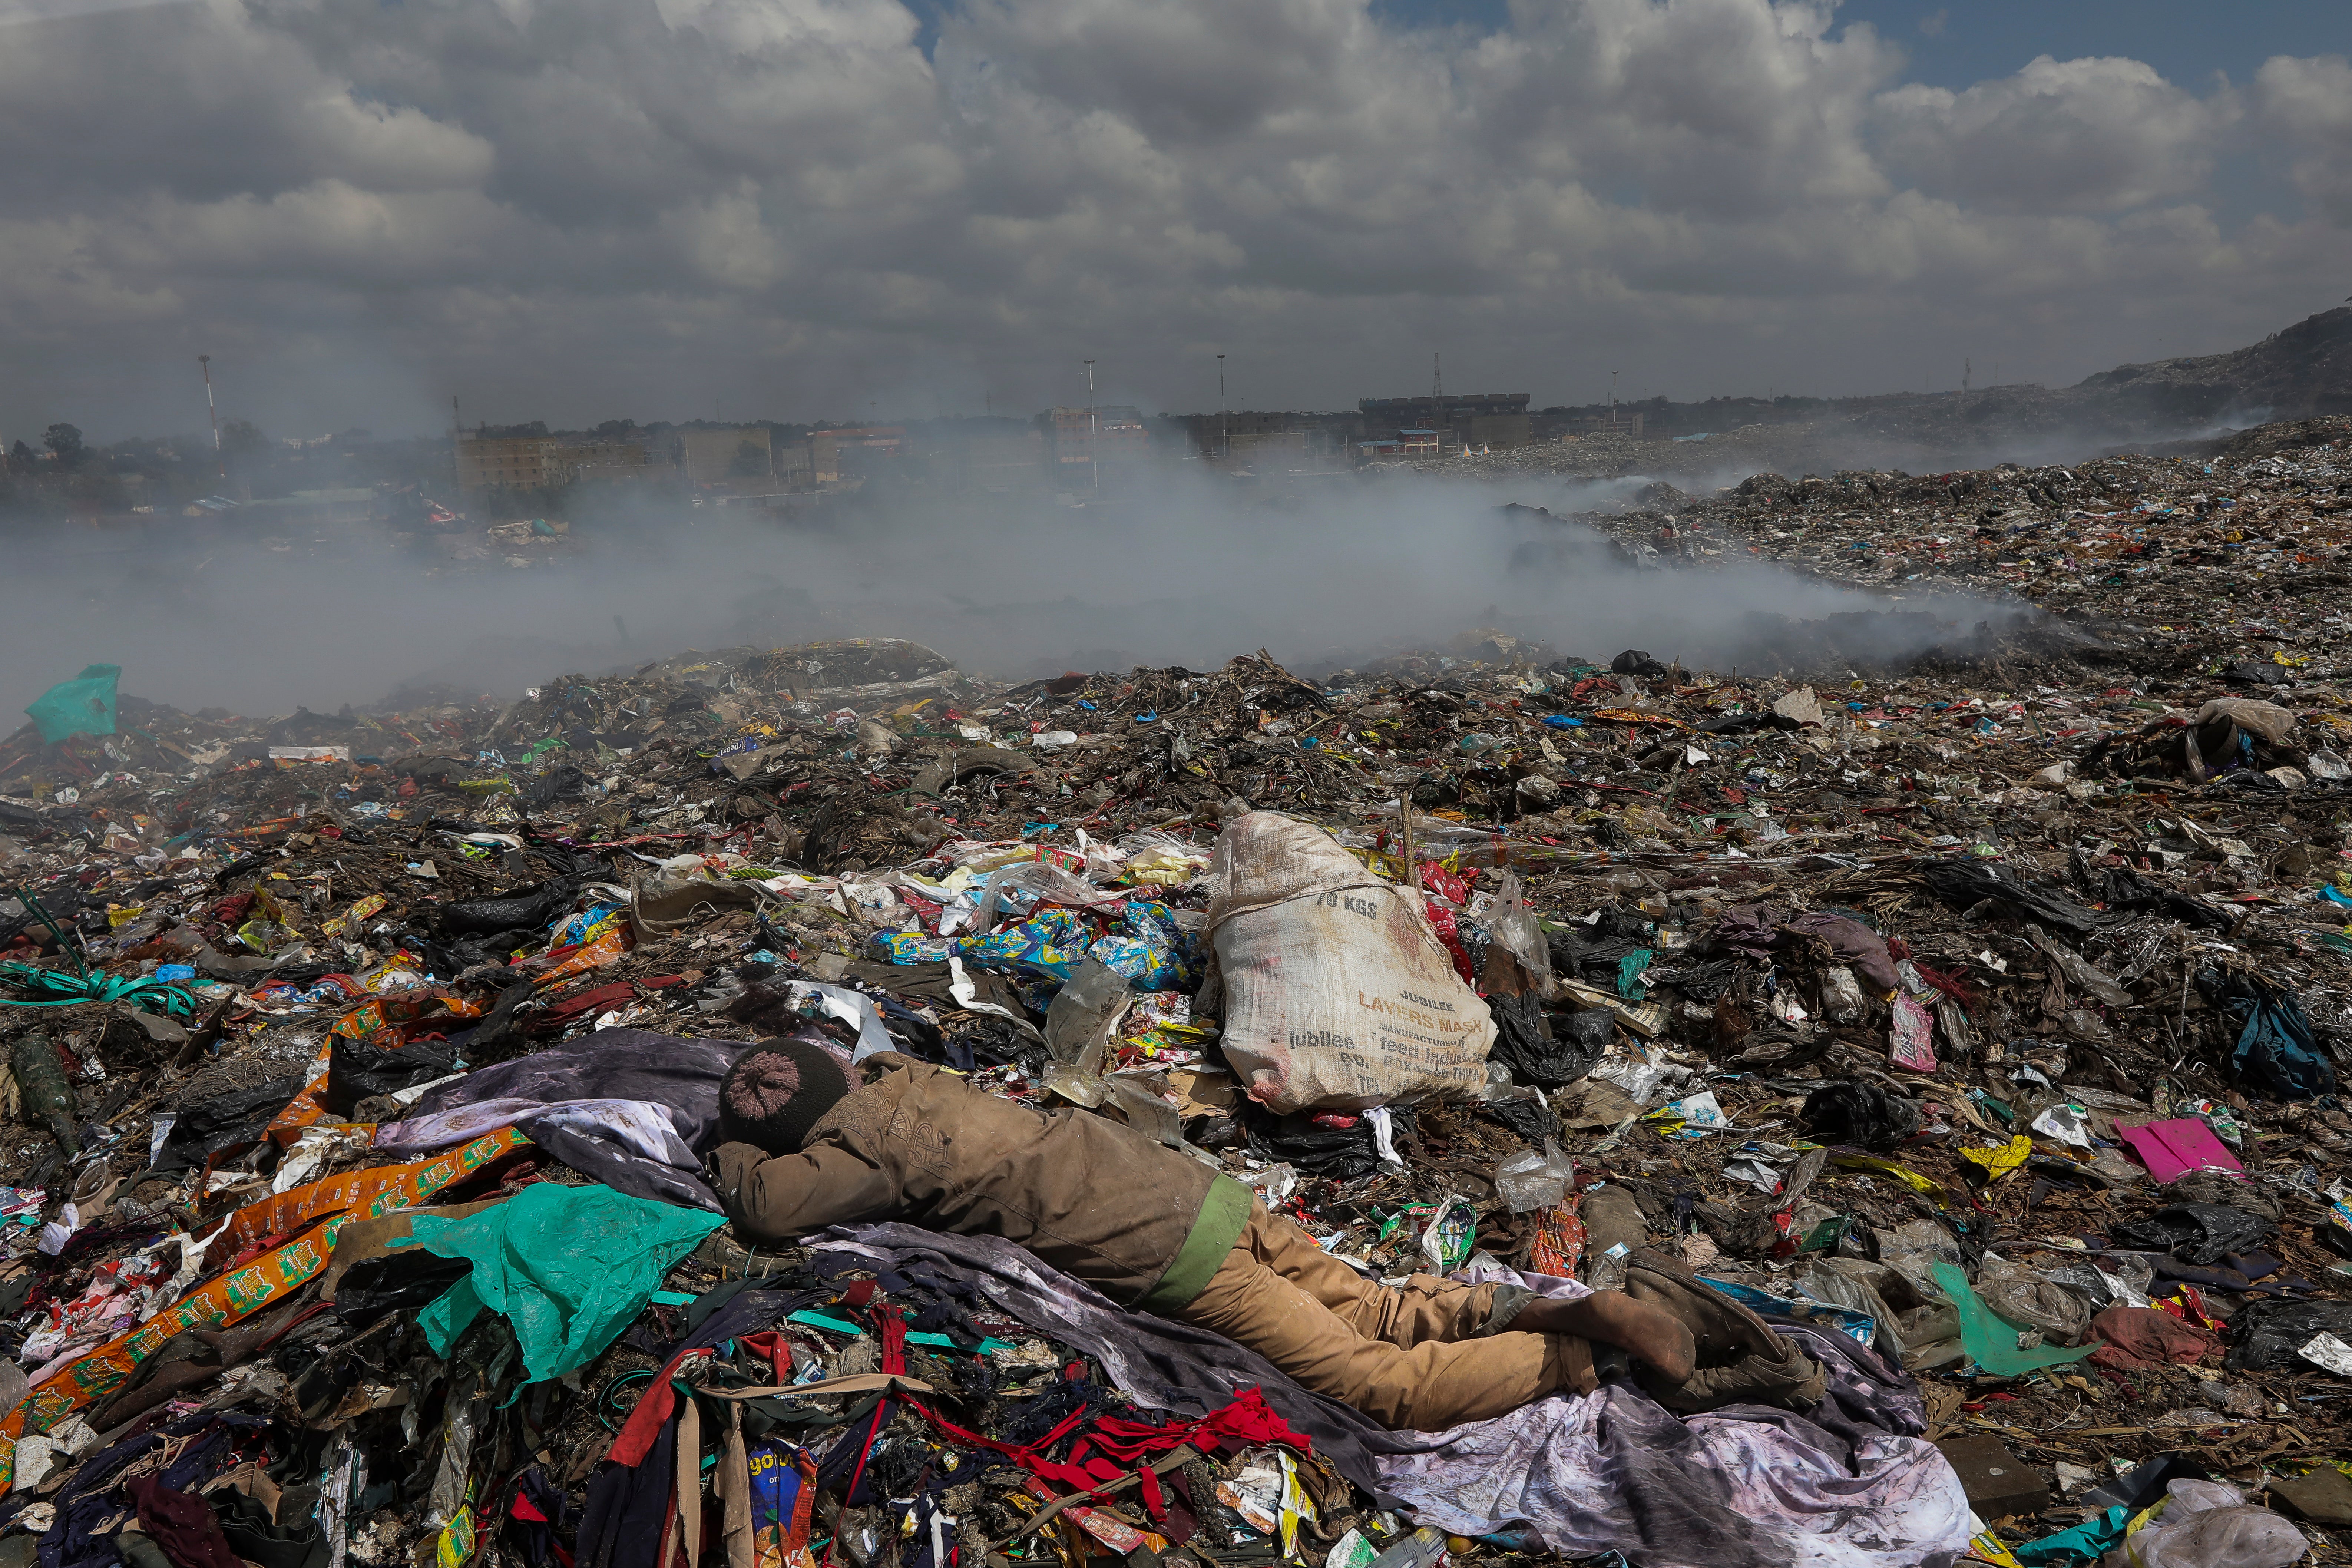 A waste picker takes a nap after walking through the steaming Dandora garbage dump as he scavenges through the landfill for recyclables that can be re-sold in Nairobi, Kenya in March